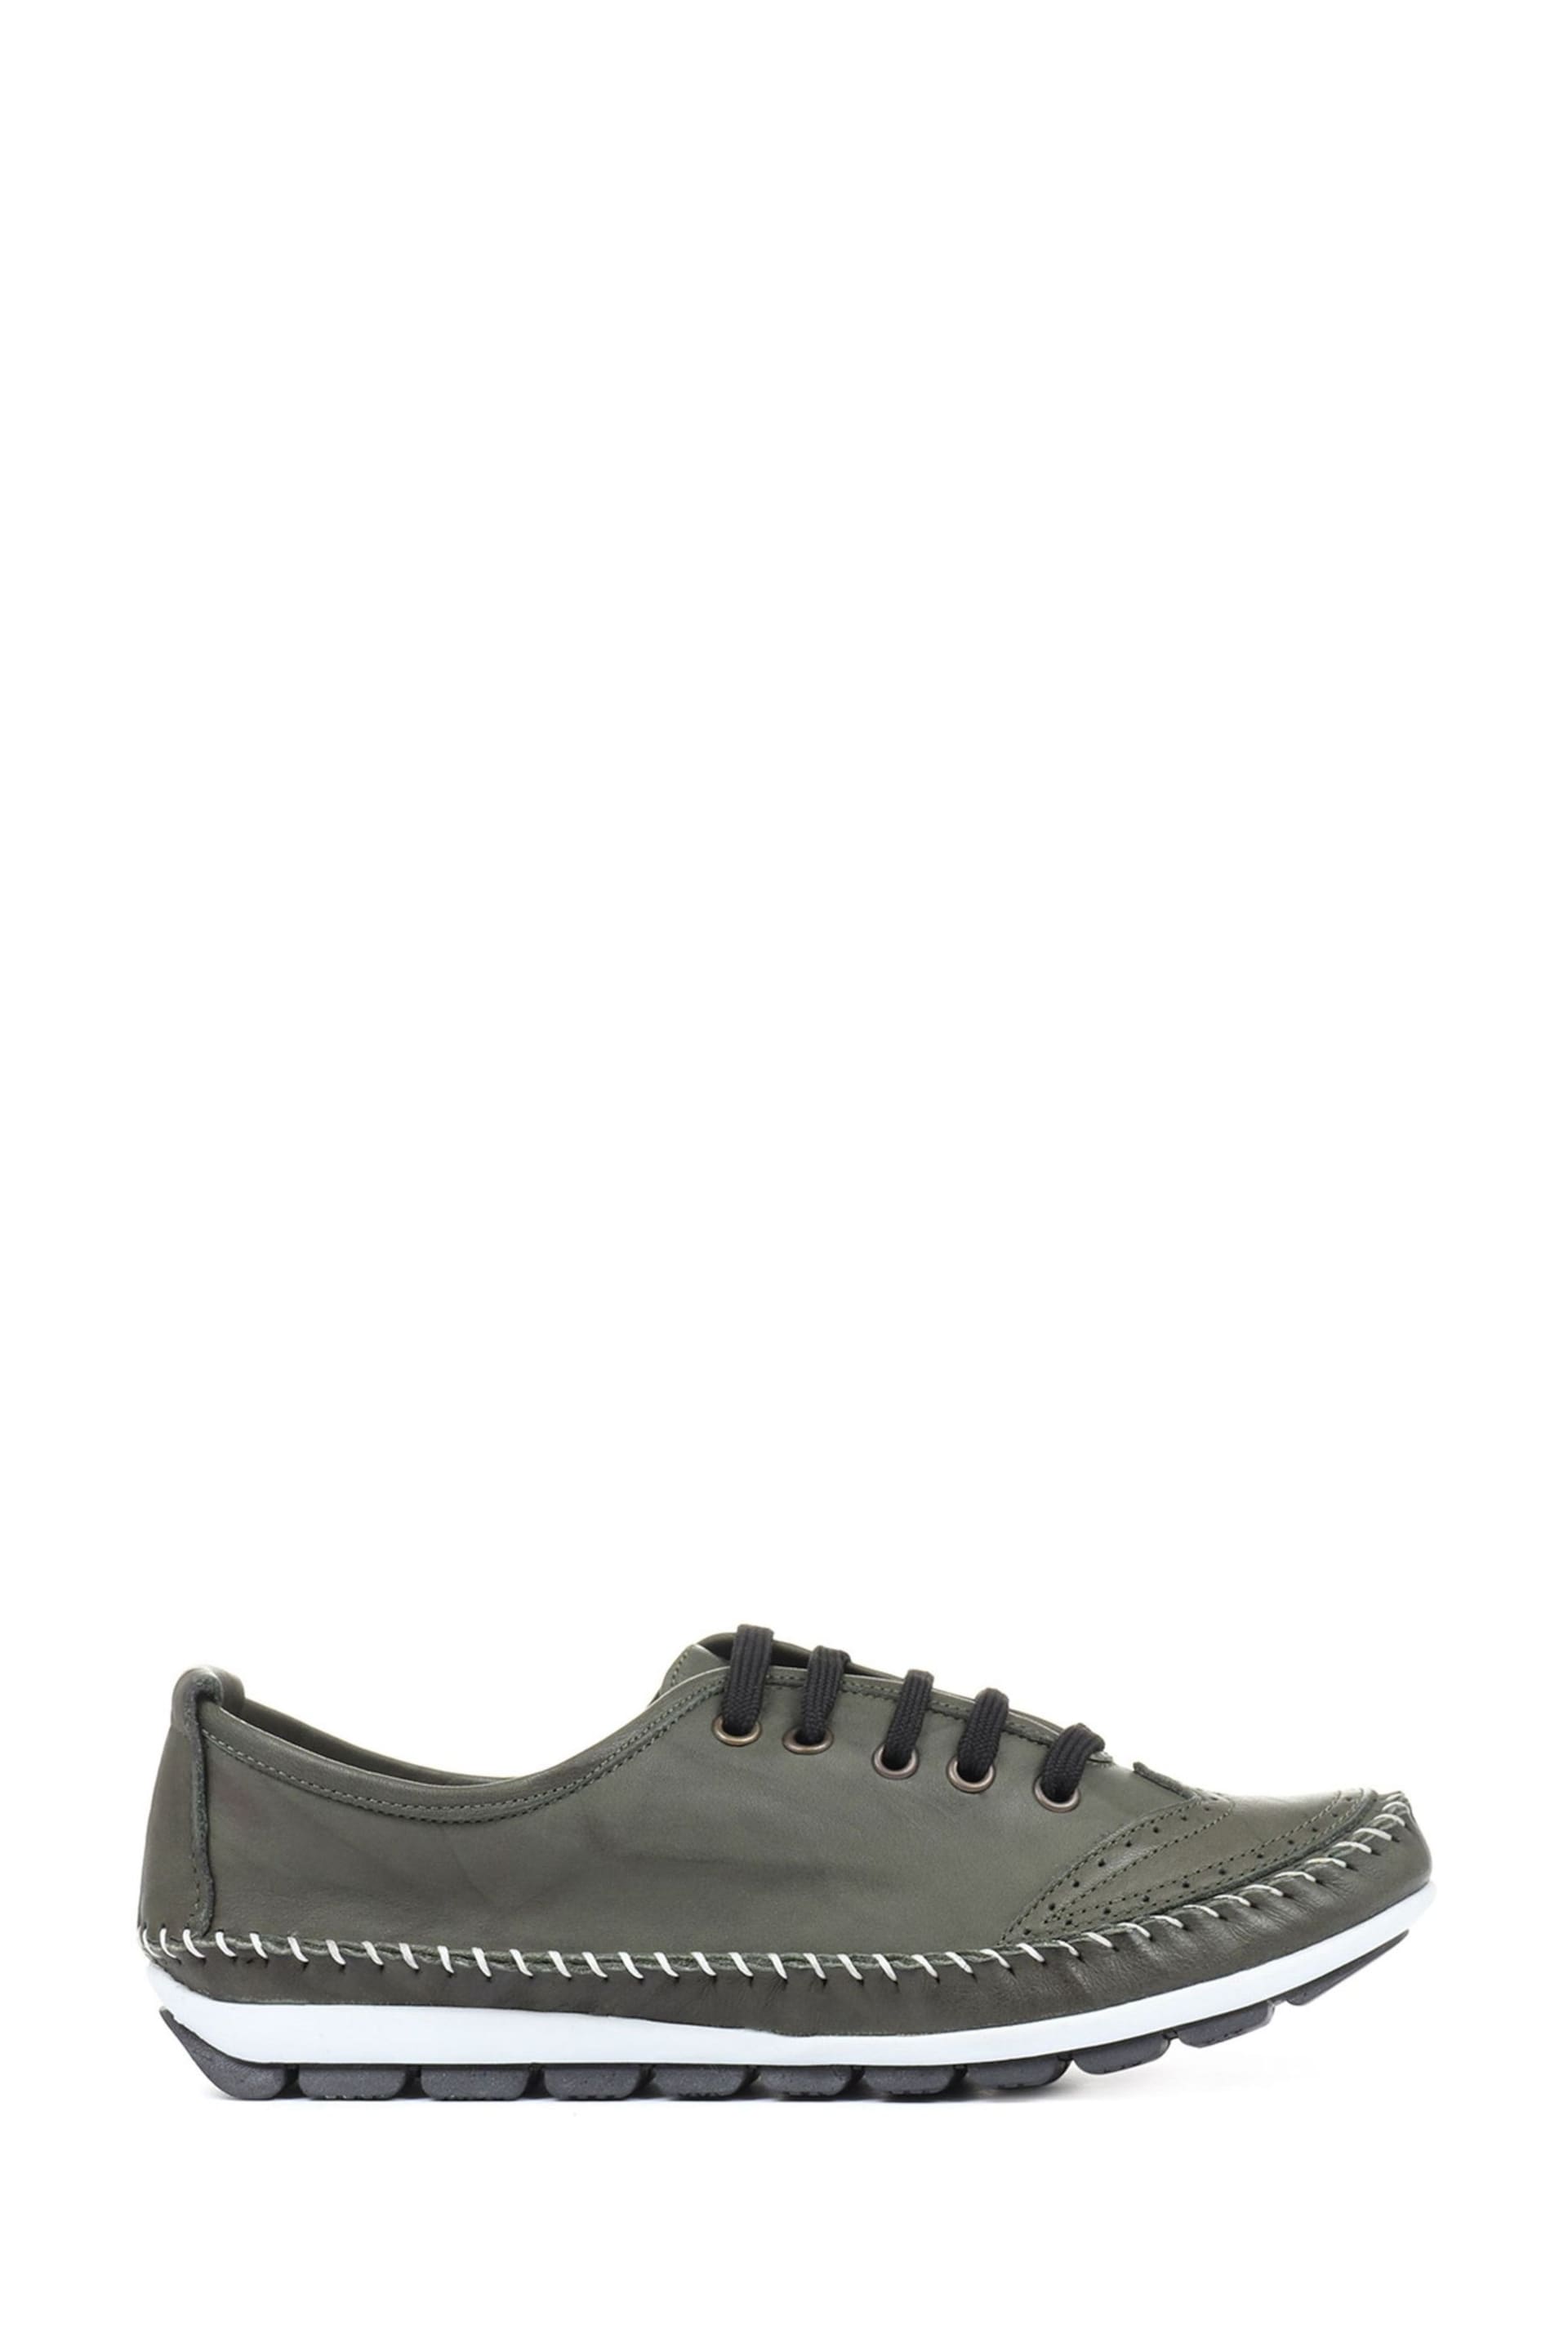 Pavers Green Ladies Leather Lace-Up Trainers - Image 1 of 5